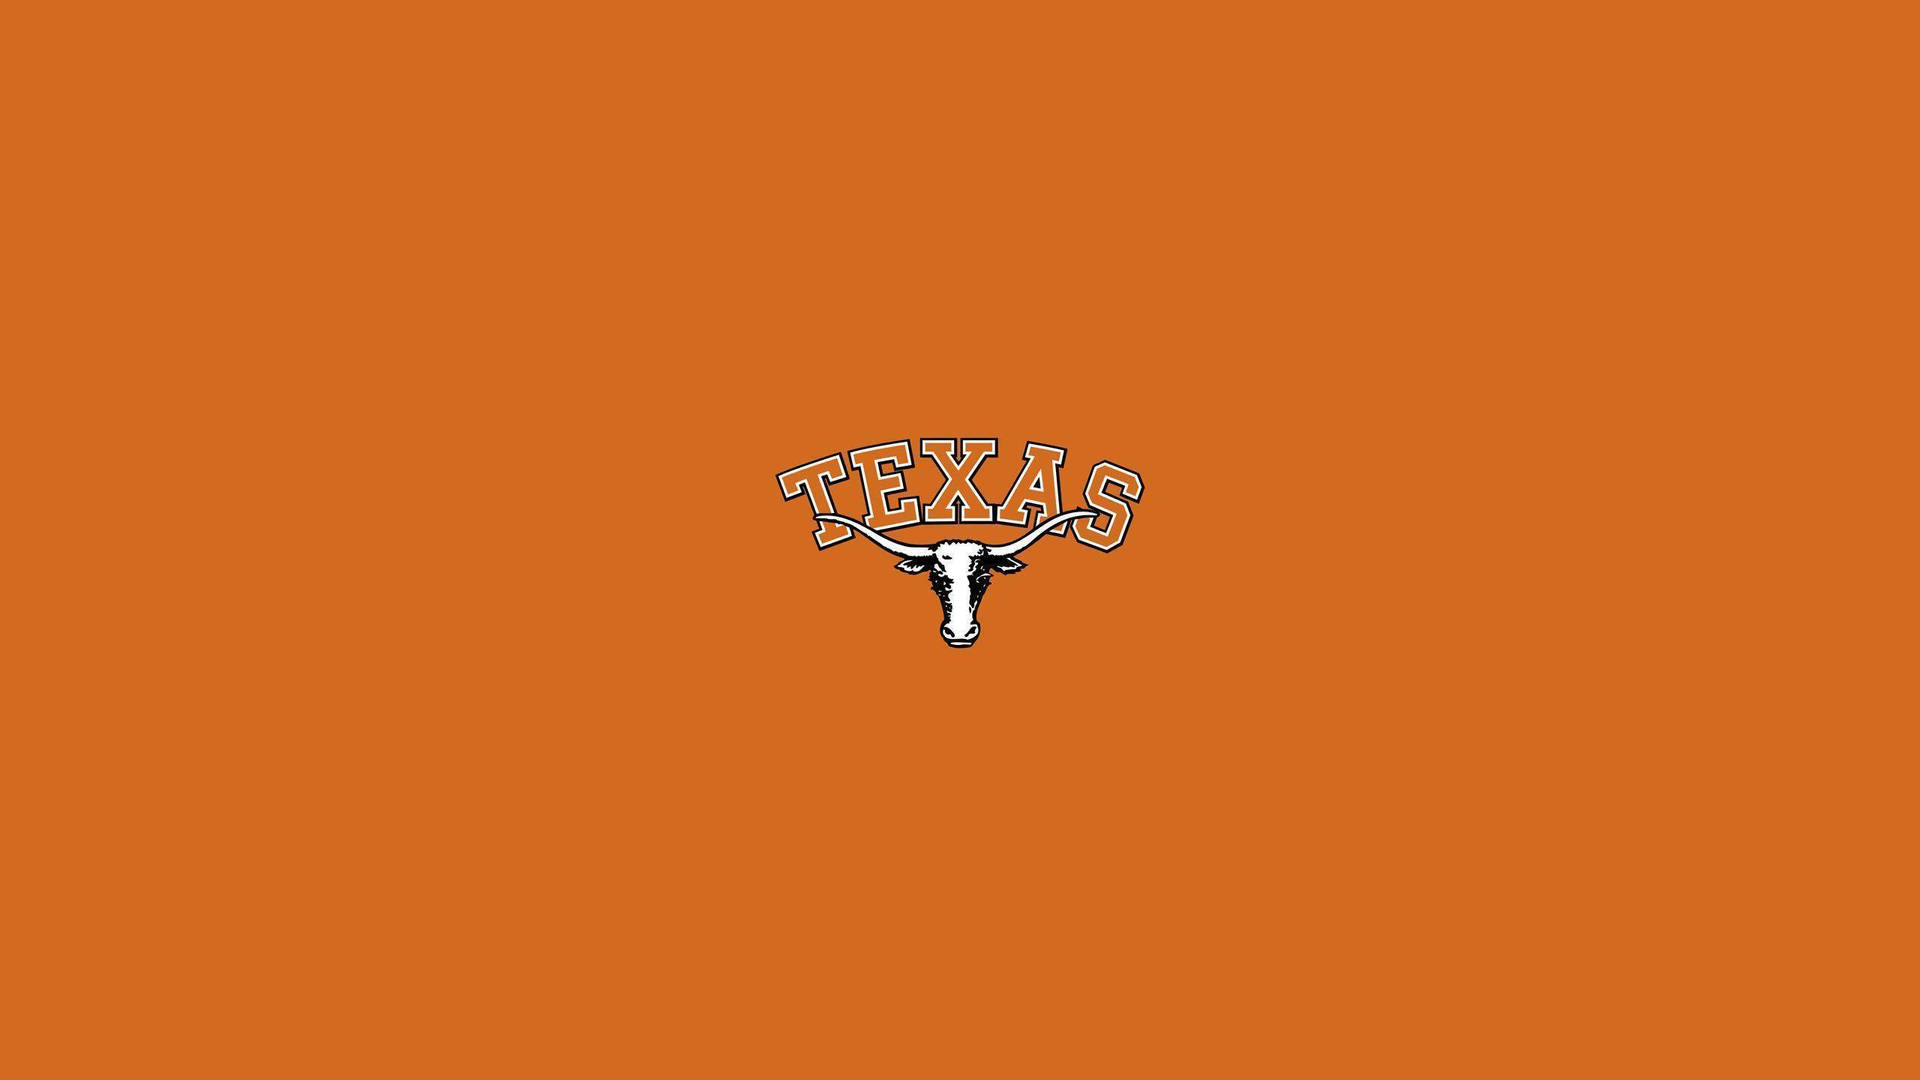 A Logo Of The Texas Rangers On An Orange Background Wallpaper